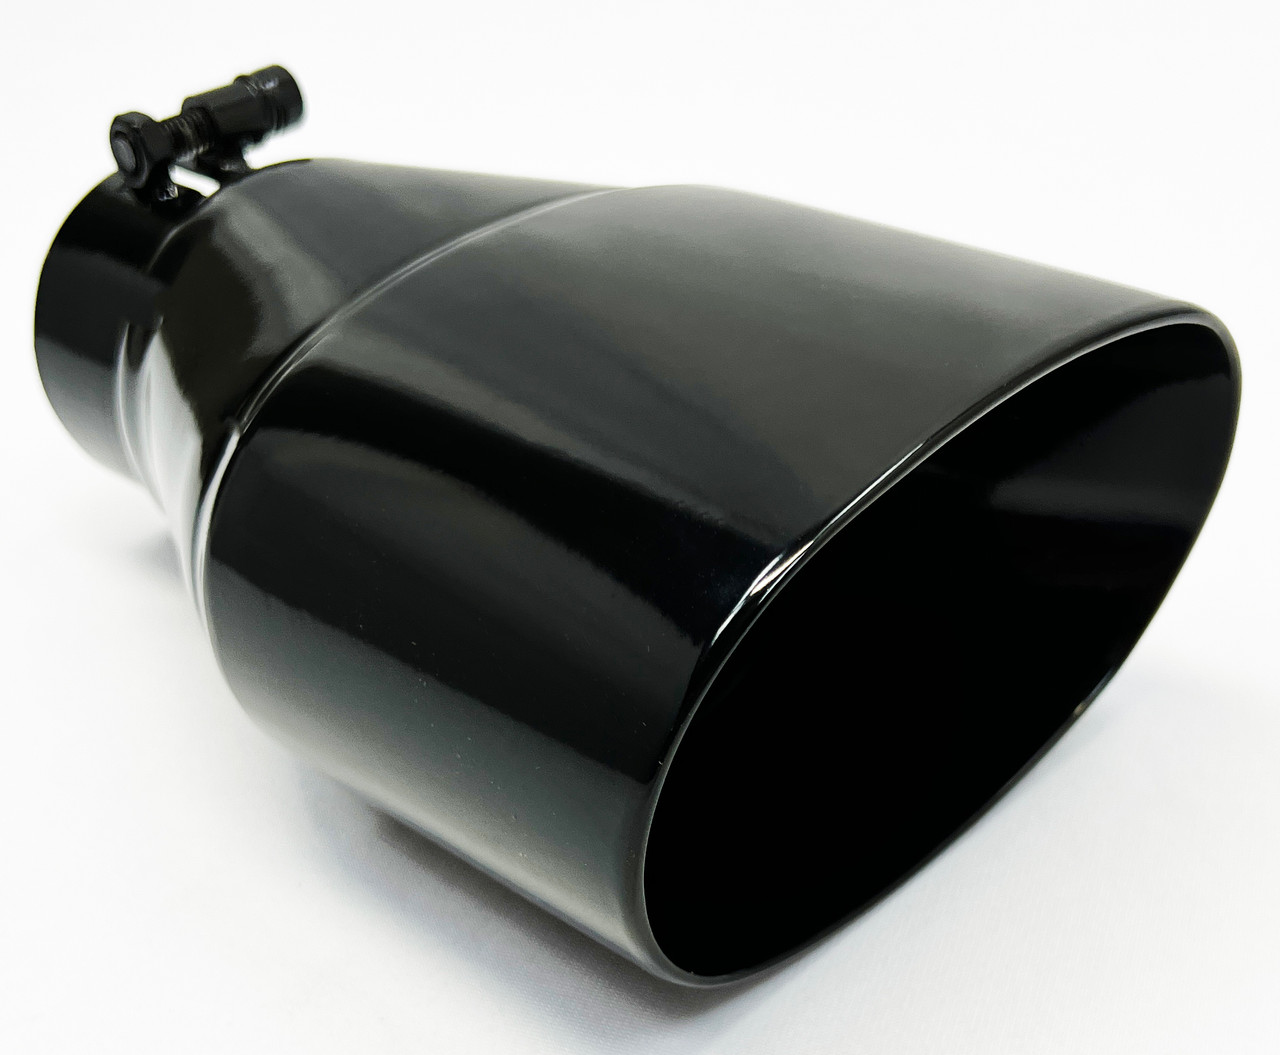 Exhaust Tip 3.00 Bolt On Inlet 5.50 X 3.50 OD Oval 8.00 Long  WDWO5508-300-BOSS-GBK-SS Double Wall 304 Stainless Gloss Black Wesdon  Exhaust Tip